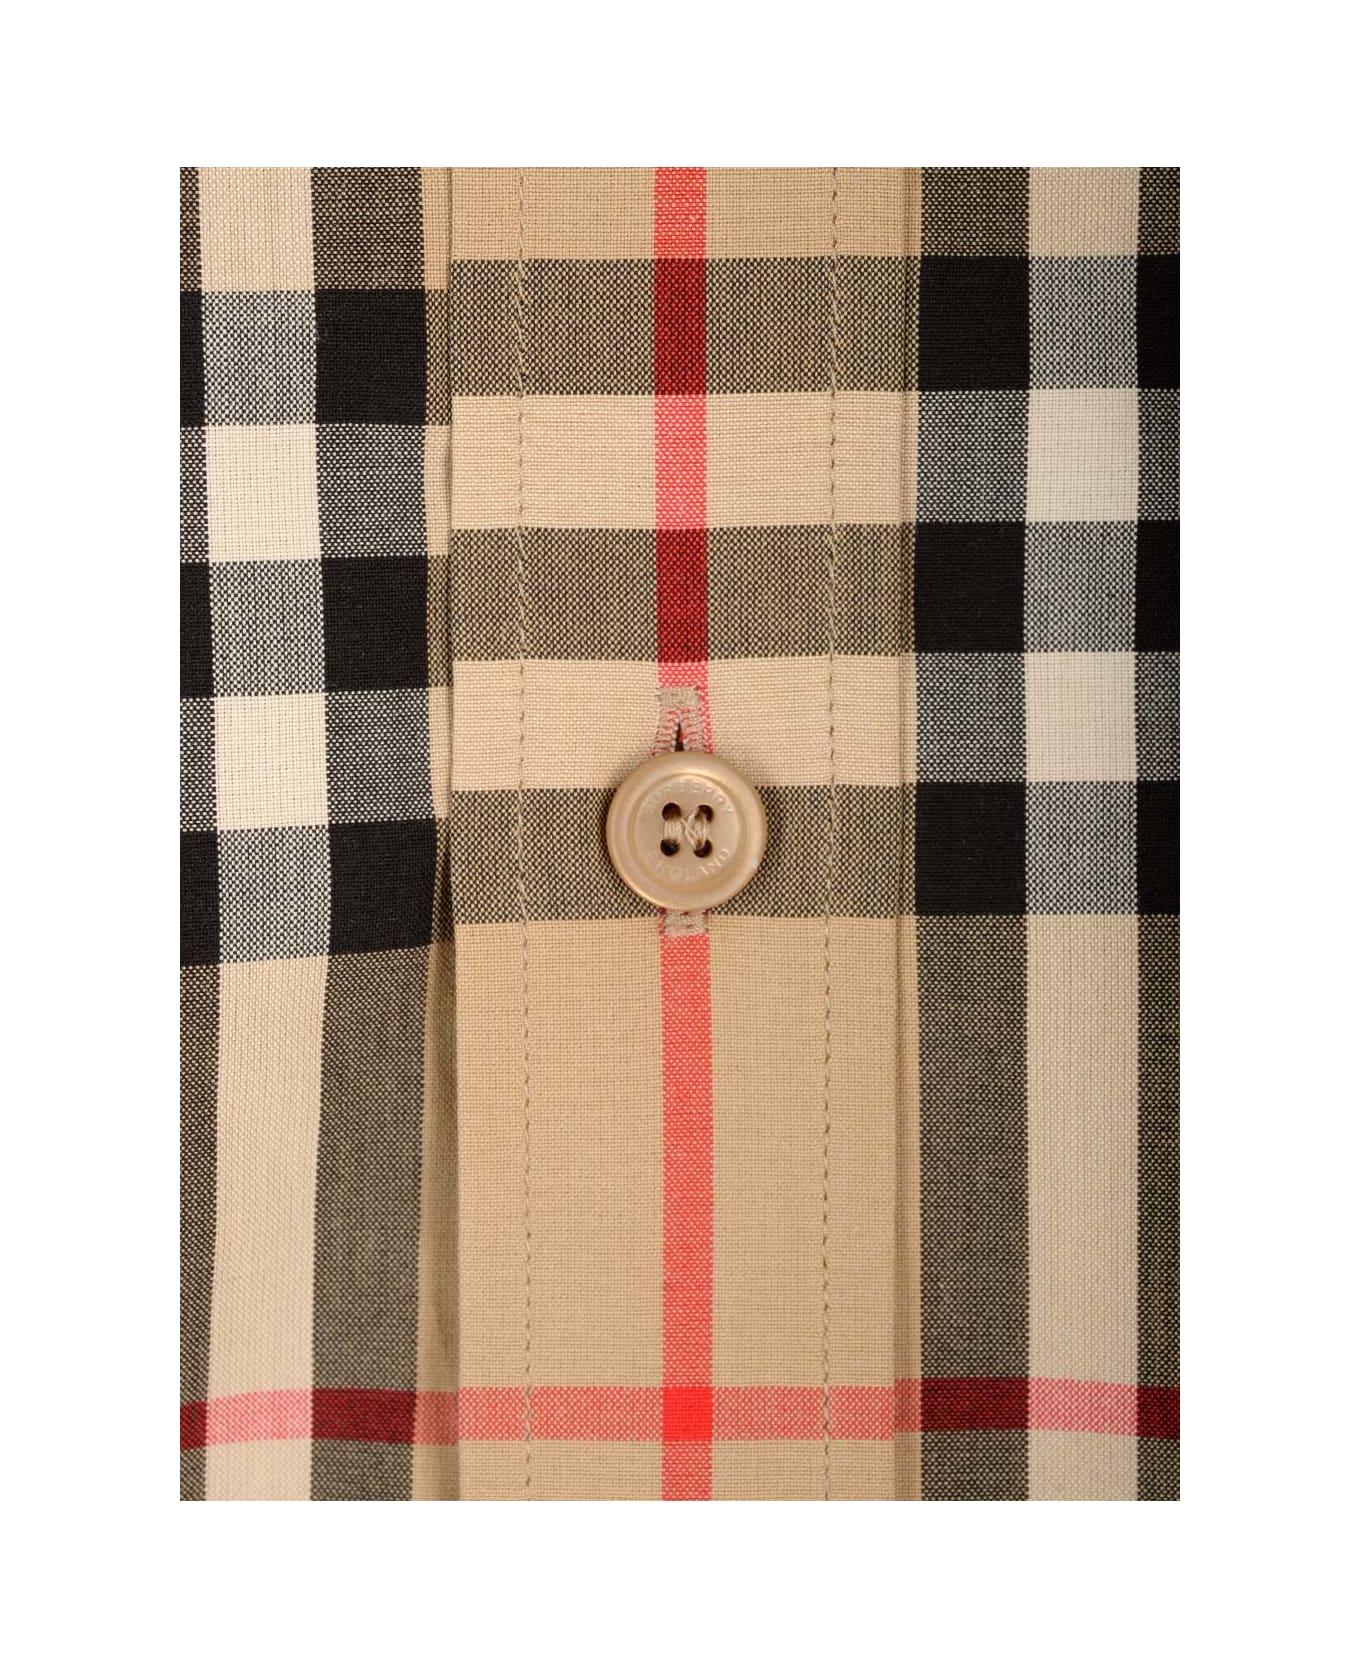 Burberry Cotton Shirt With Check Pattern - Beige シャツ